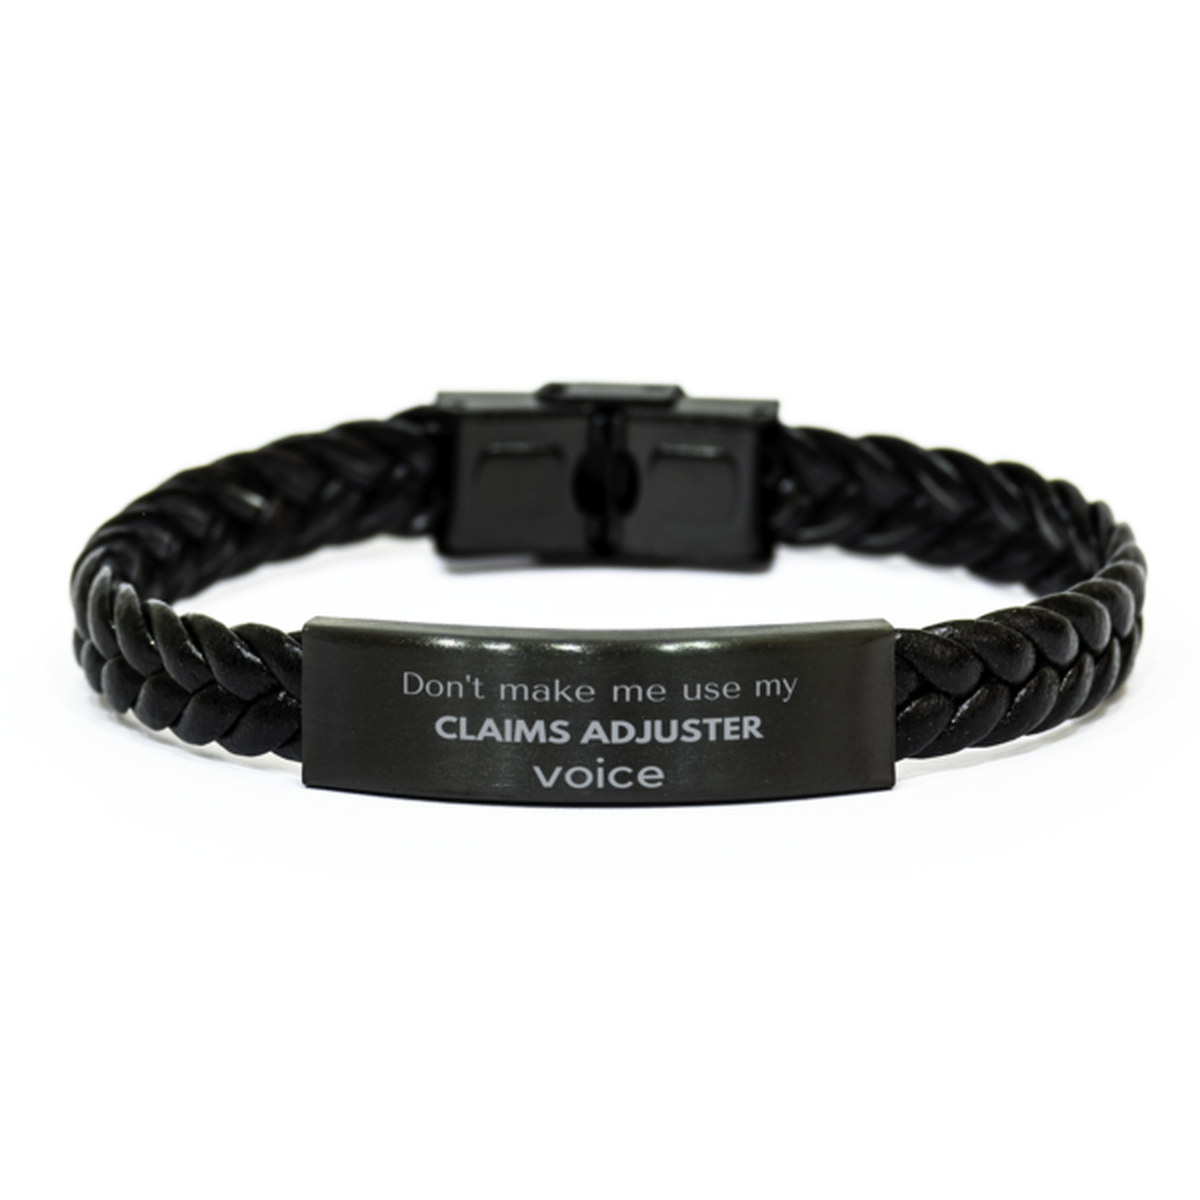 Don't make me use my Claims Adjuster voice, Sarcasm Claims Adjuster Gifts, Christmas Claims Adjuster Braided Leather Bracelet Birthday Unique Gifts For Claims Adjuster Coworkers, Men, Women, Colleague, Friends